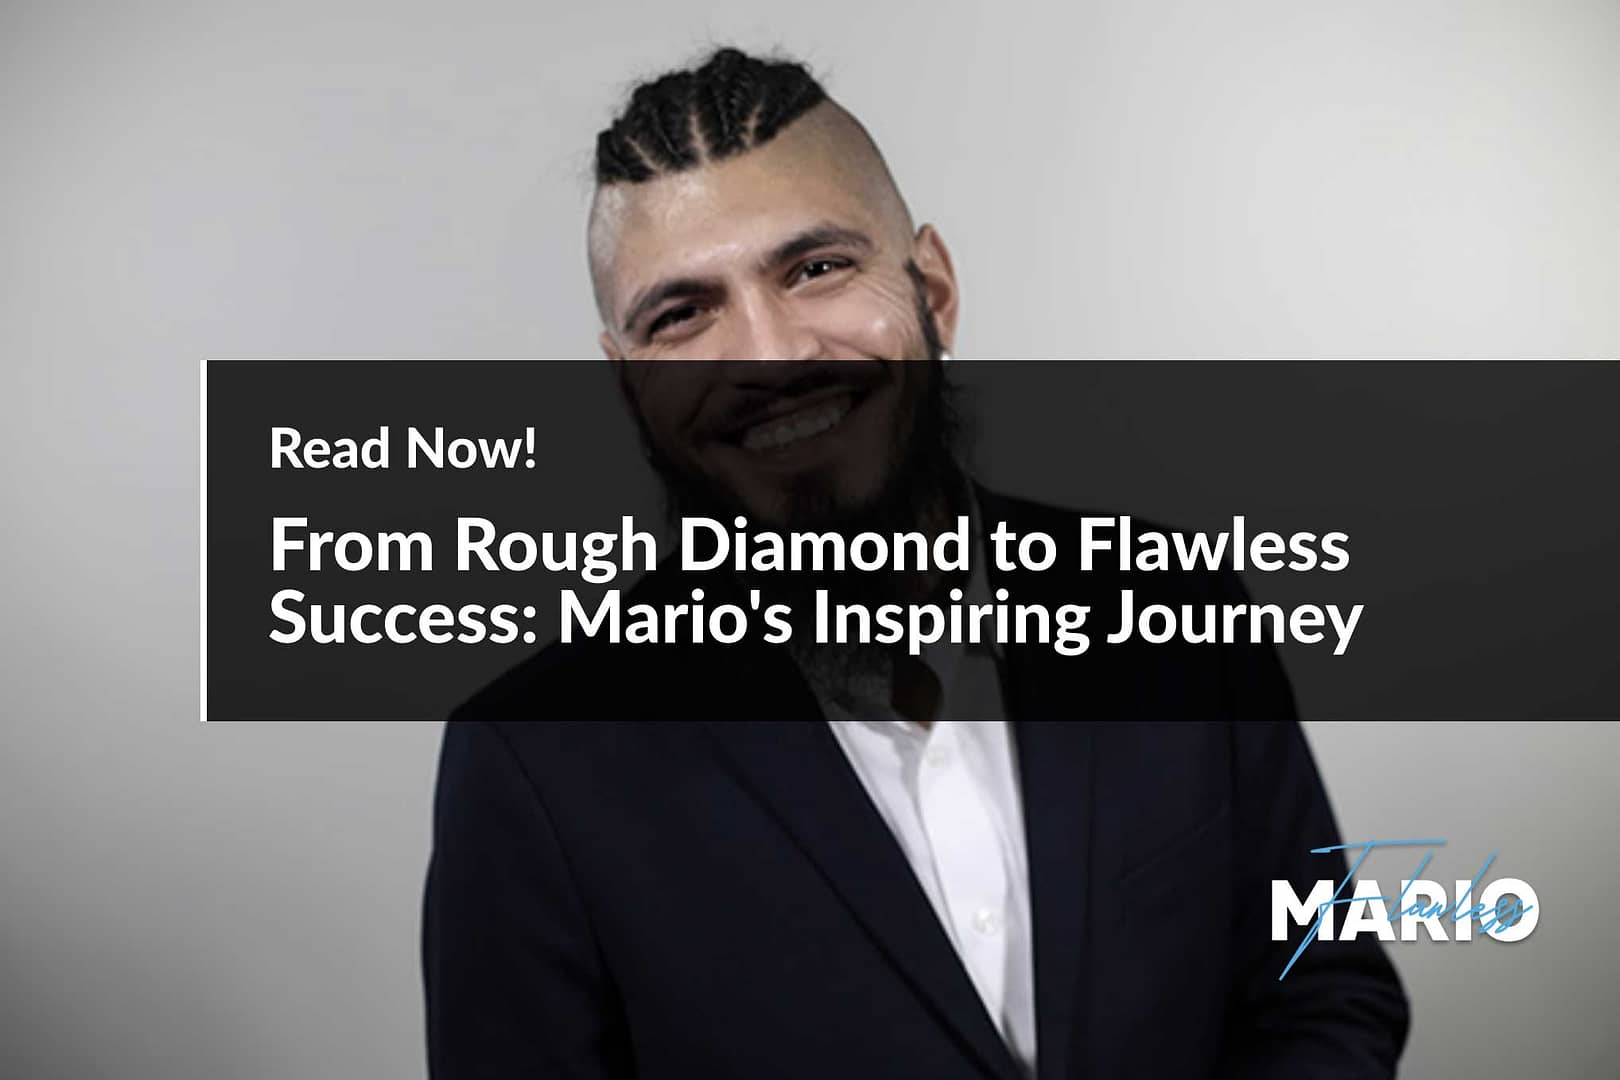 From Rough Diamond to Flawless Success: Mario's Inspiring Journey